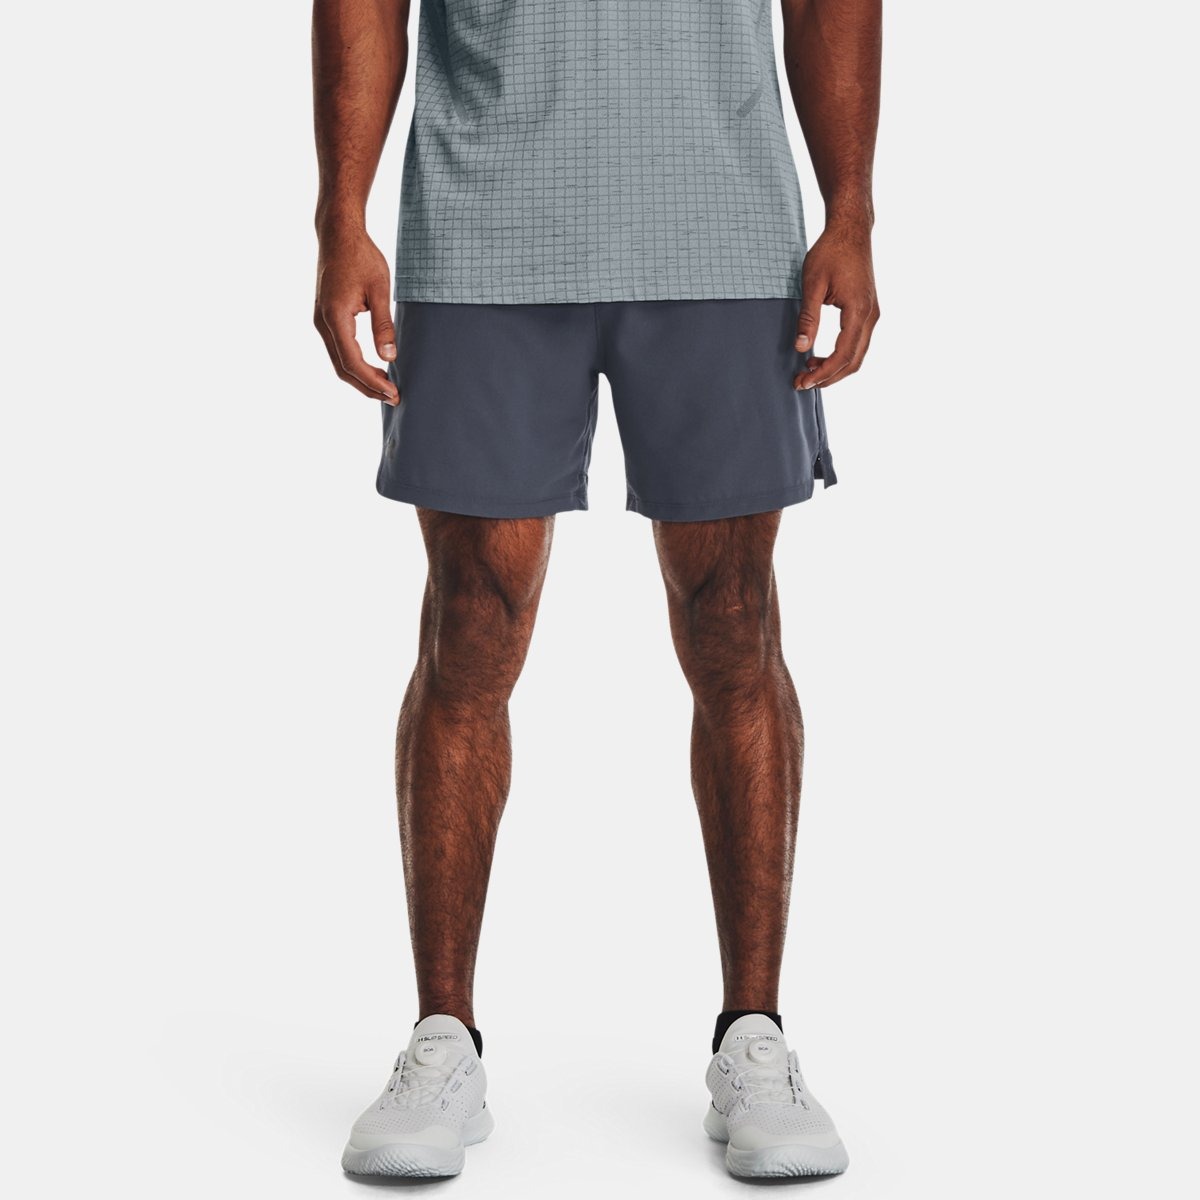 Gent Shorts in Grey at Under Armour GOOFASH